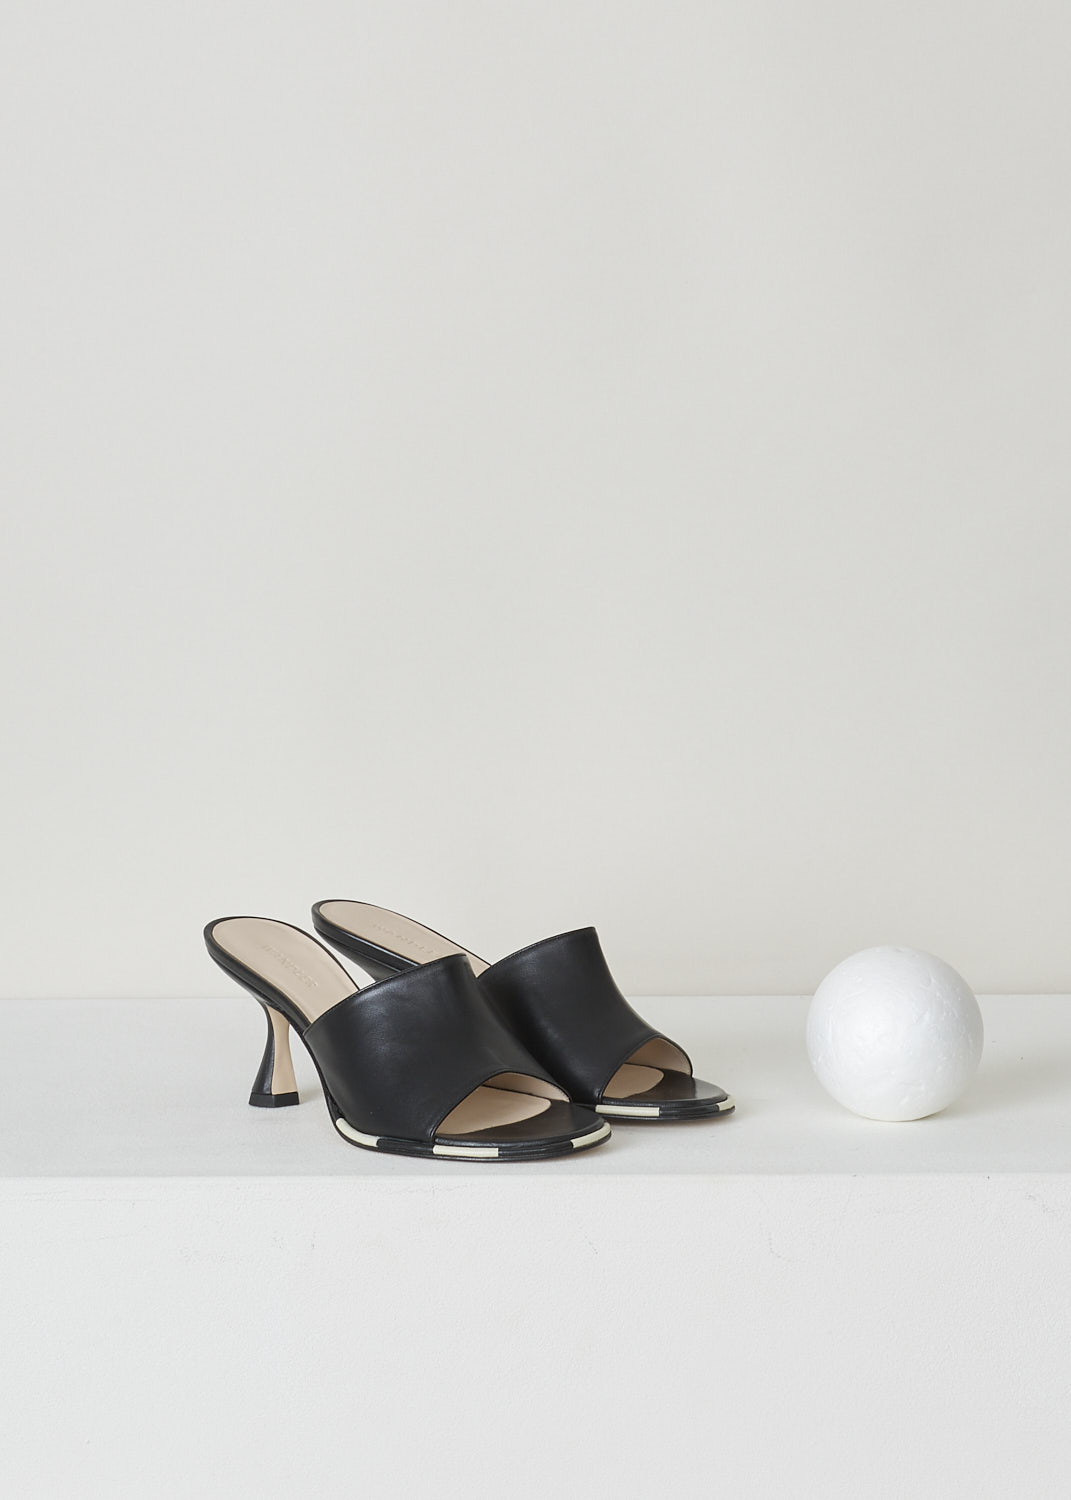 WANDLER, BLACK HEELED MULES, 22202_701204_3248_AGNES_MULE_BLACK_MIX, Black, Front, These black heeled mules have a rounded open-toe with contrasting white stripes decorating the trim. The slip-on mules have a mid-height trapezoid shaped heel.
